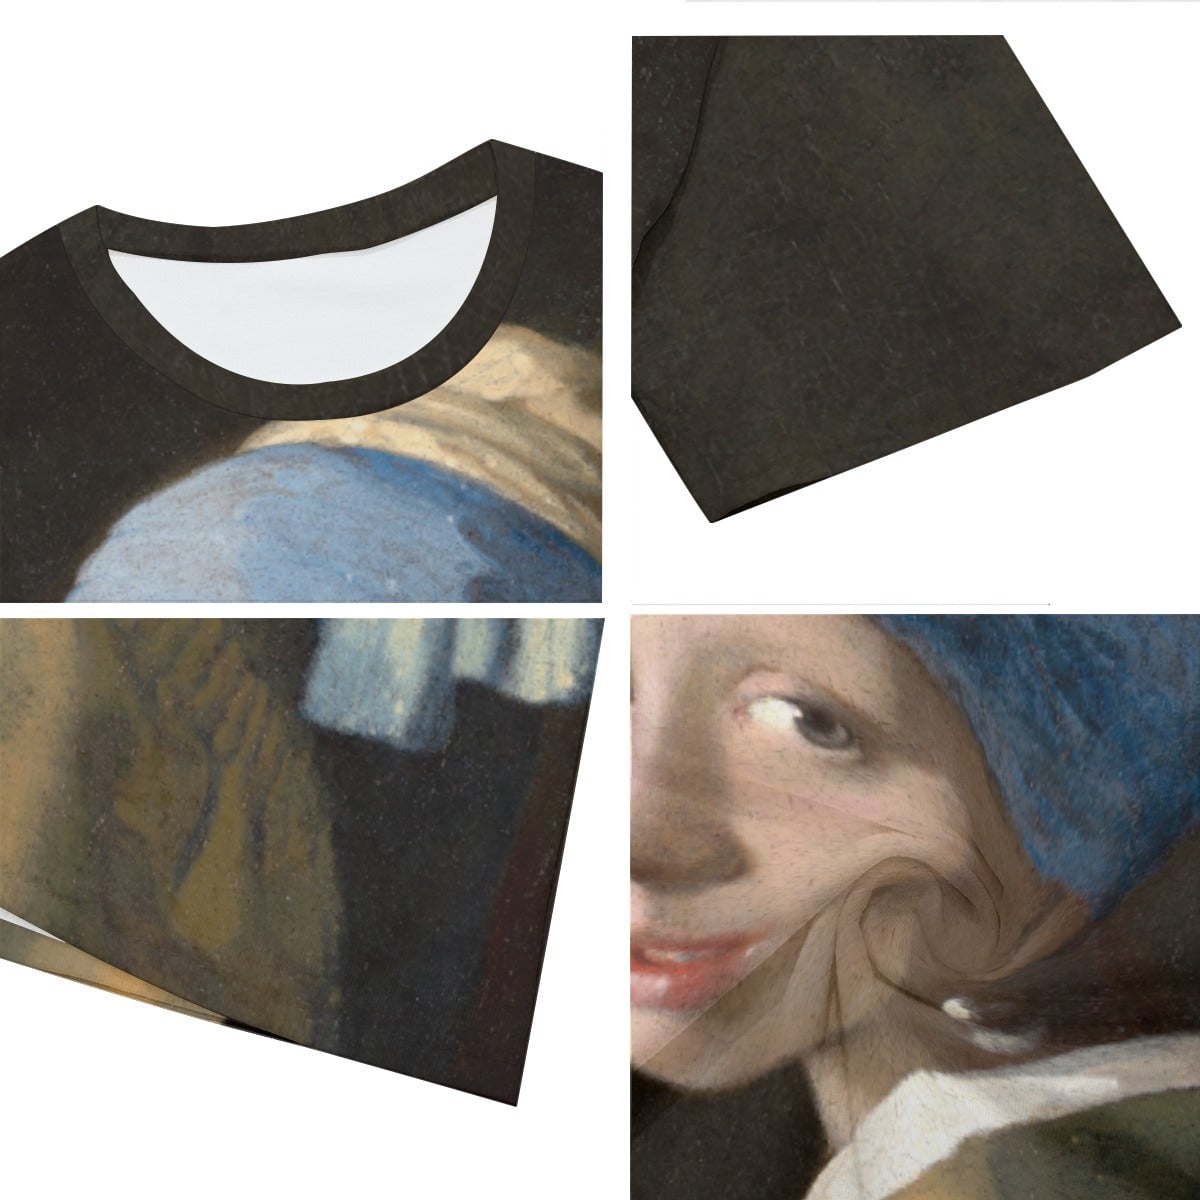 Girl with a Pearl Earring Johannes Vermeer T-Shirt